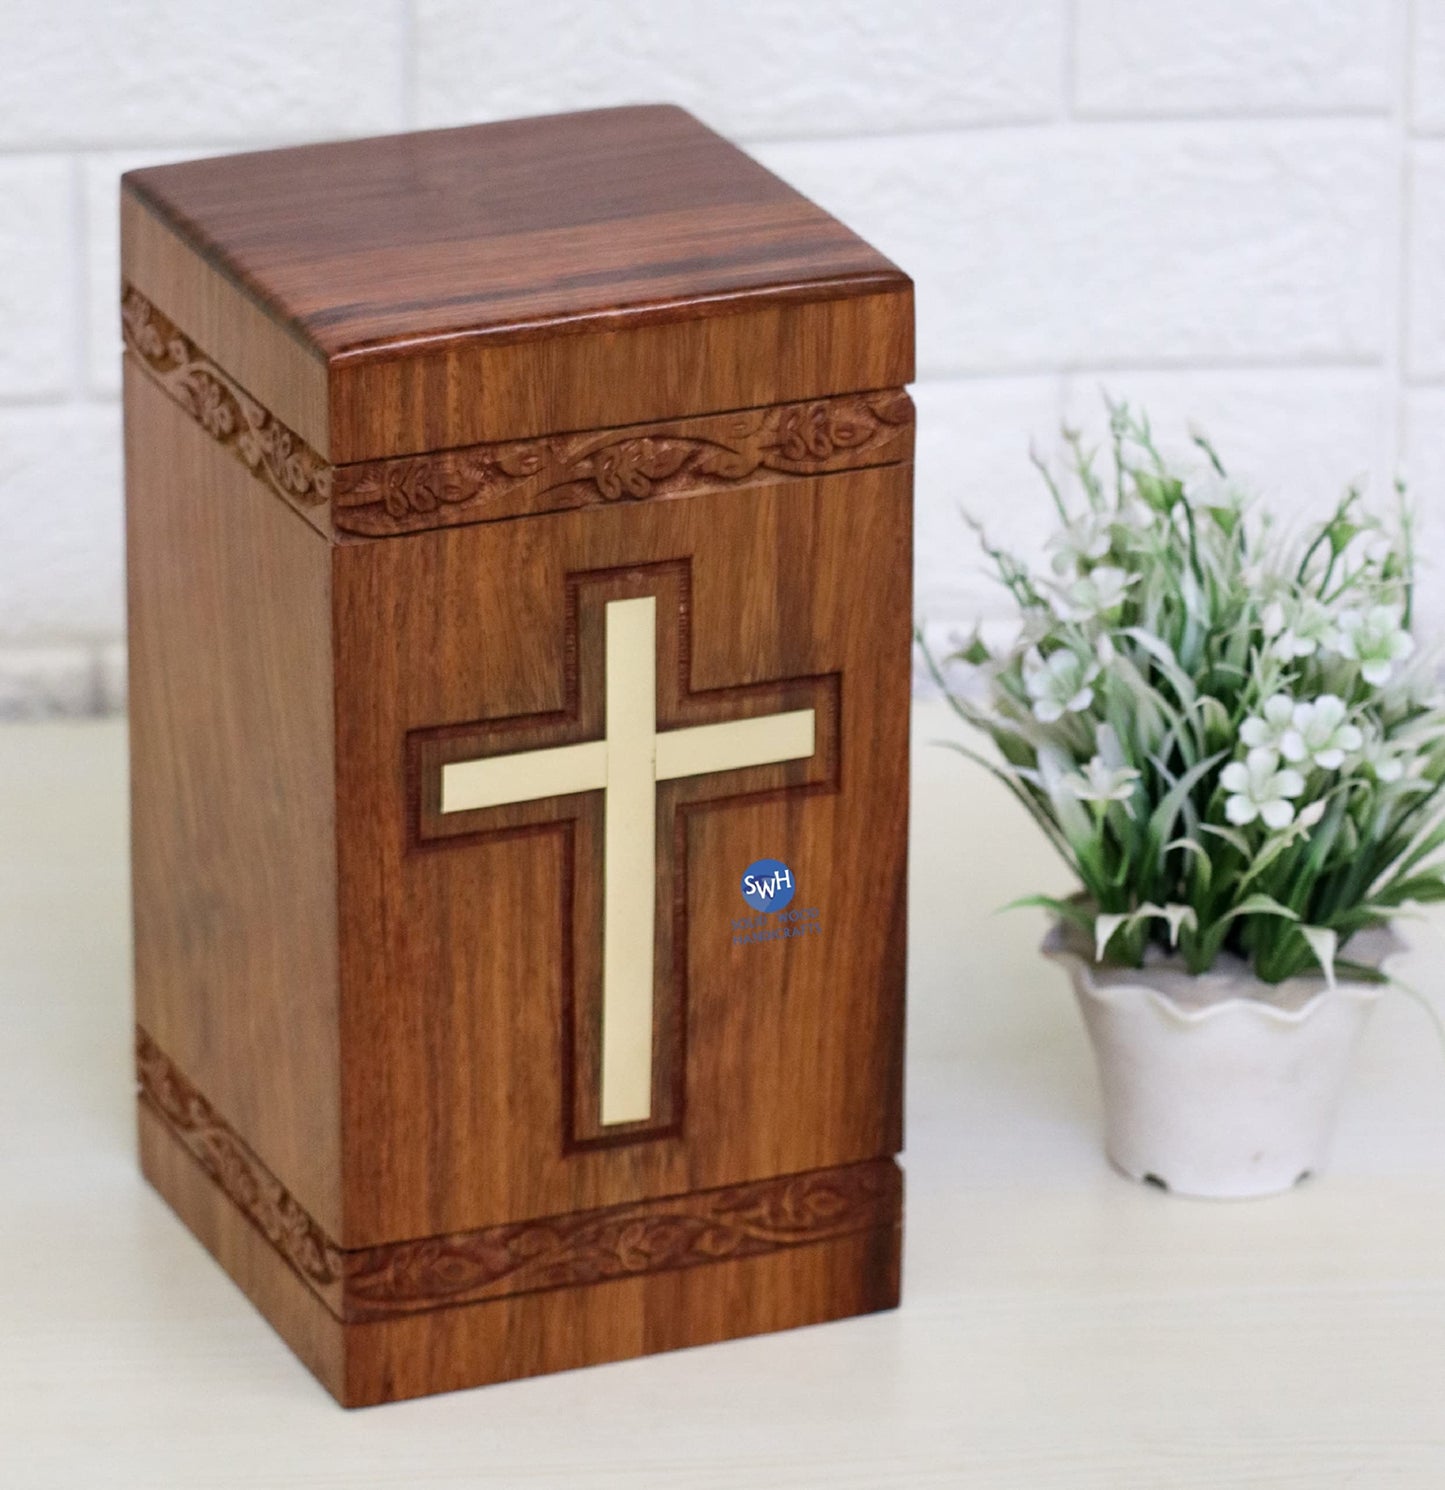 Handcrafted Wooden Urns for Ashes | Cross Engraved Rosewood Urn for Human Ashes | Funeral Pet Urns for Dogs Ashes Large 200 Cubic Inches with Bottom